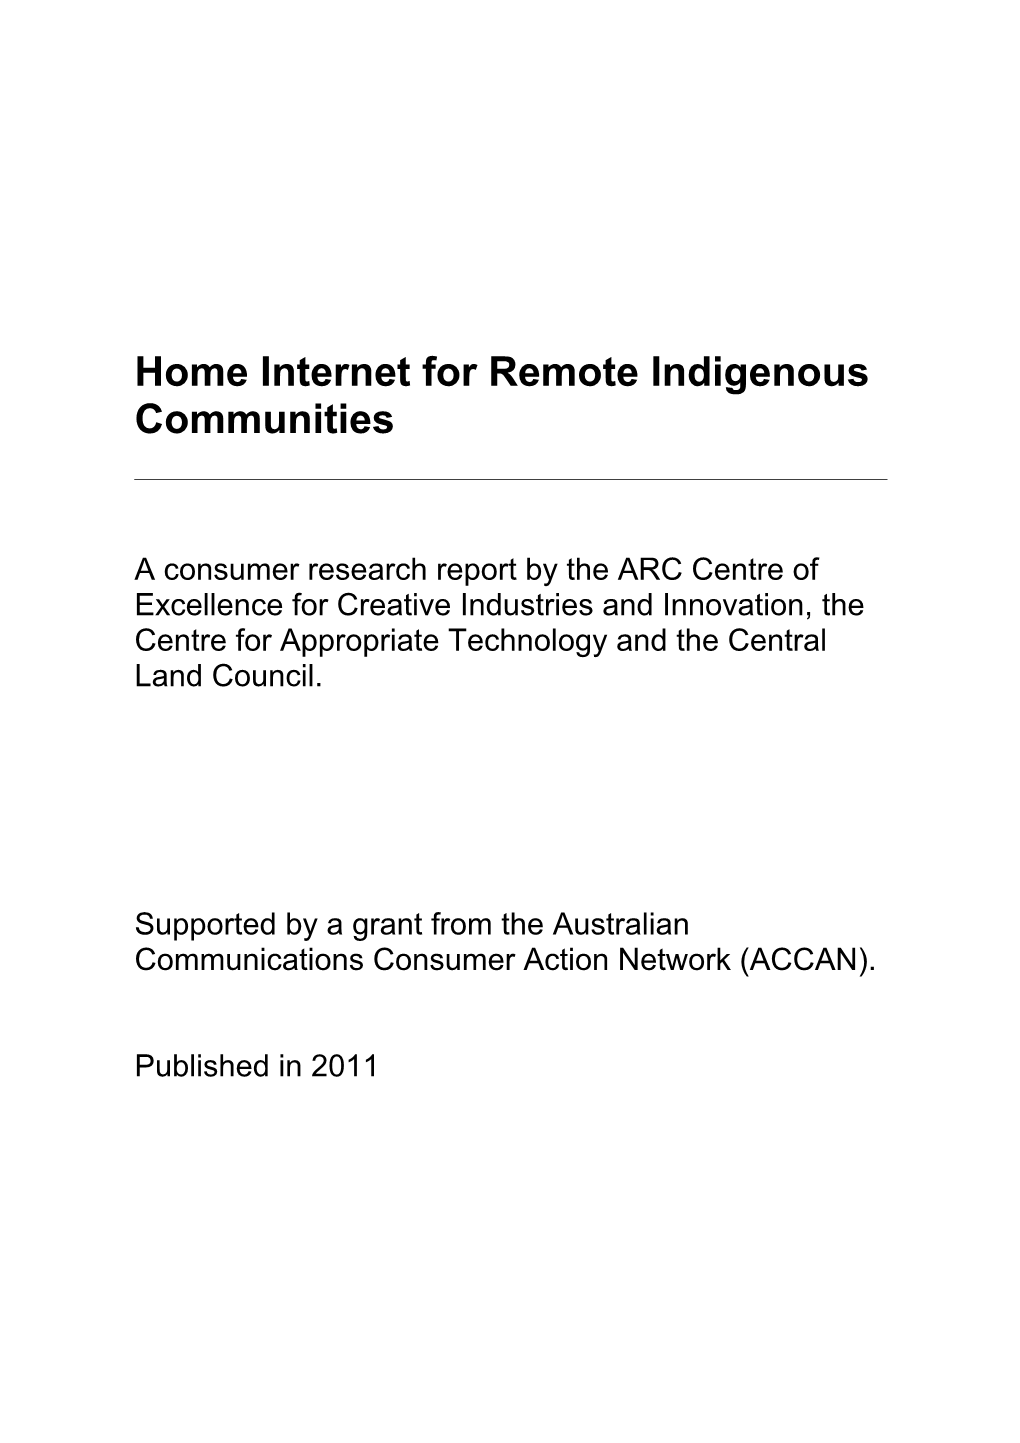 The Determinants of Success for Home Internet for Remote Indigenous Communities